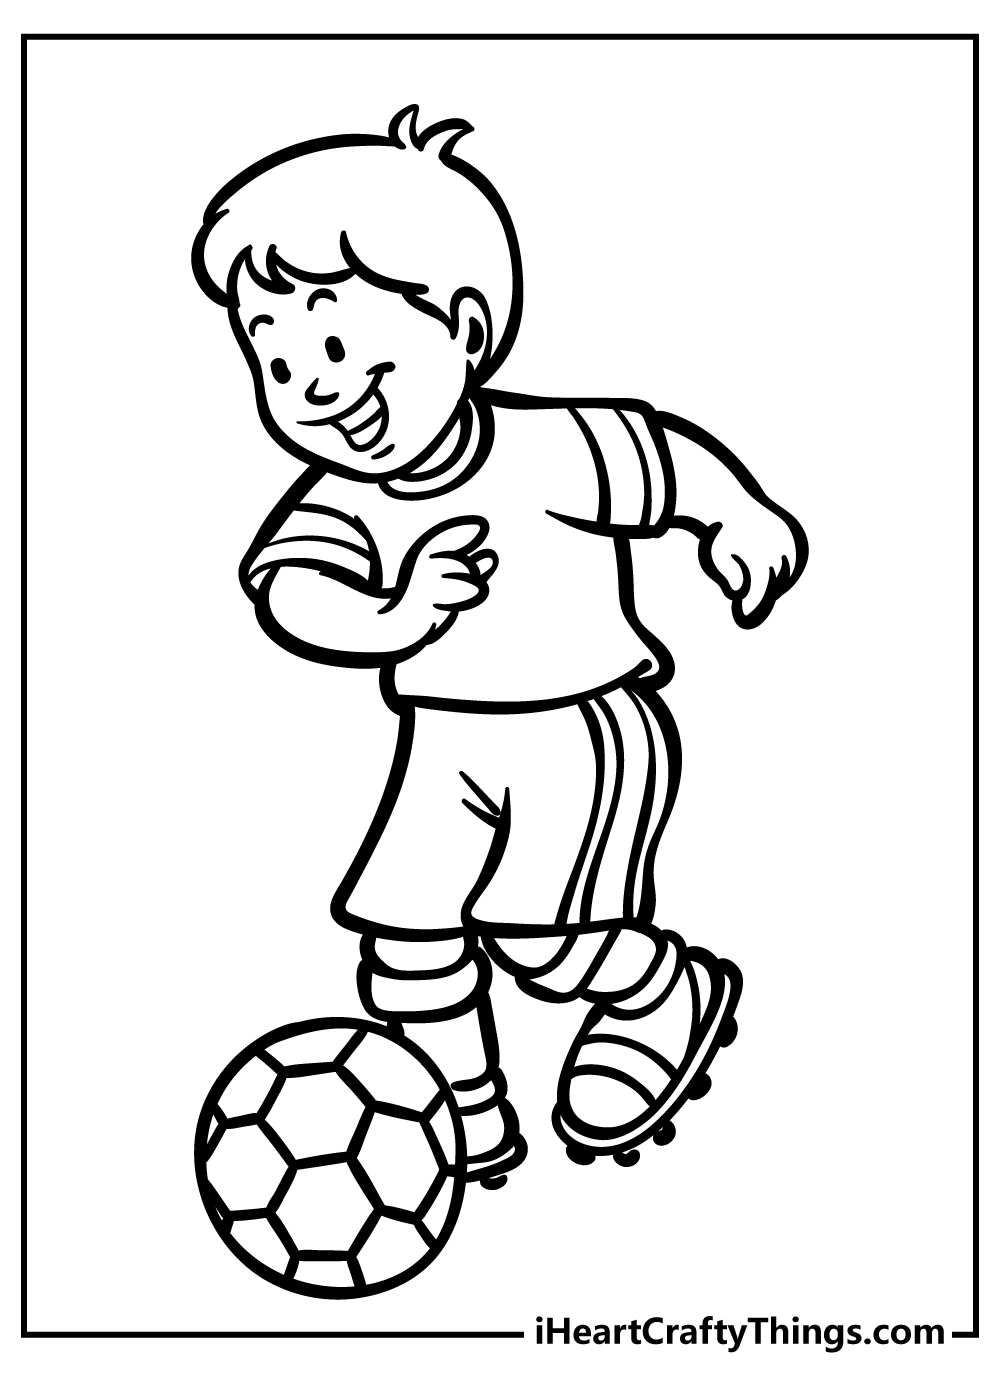 Football Coloring Pages for adults free printable